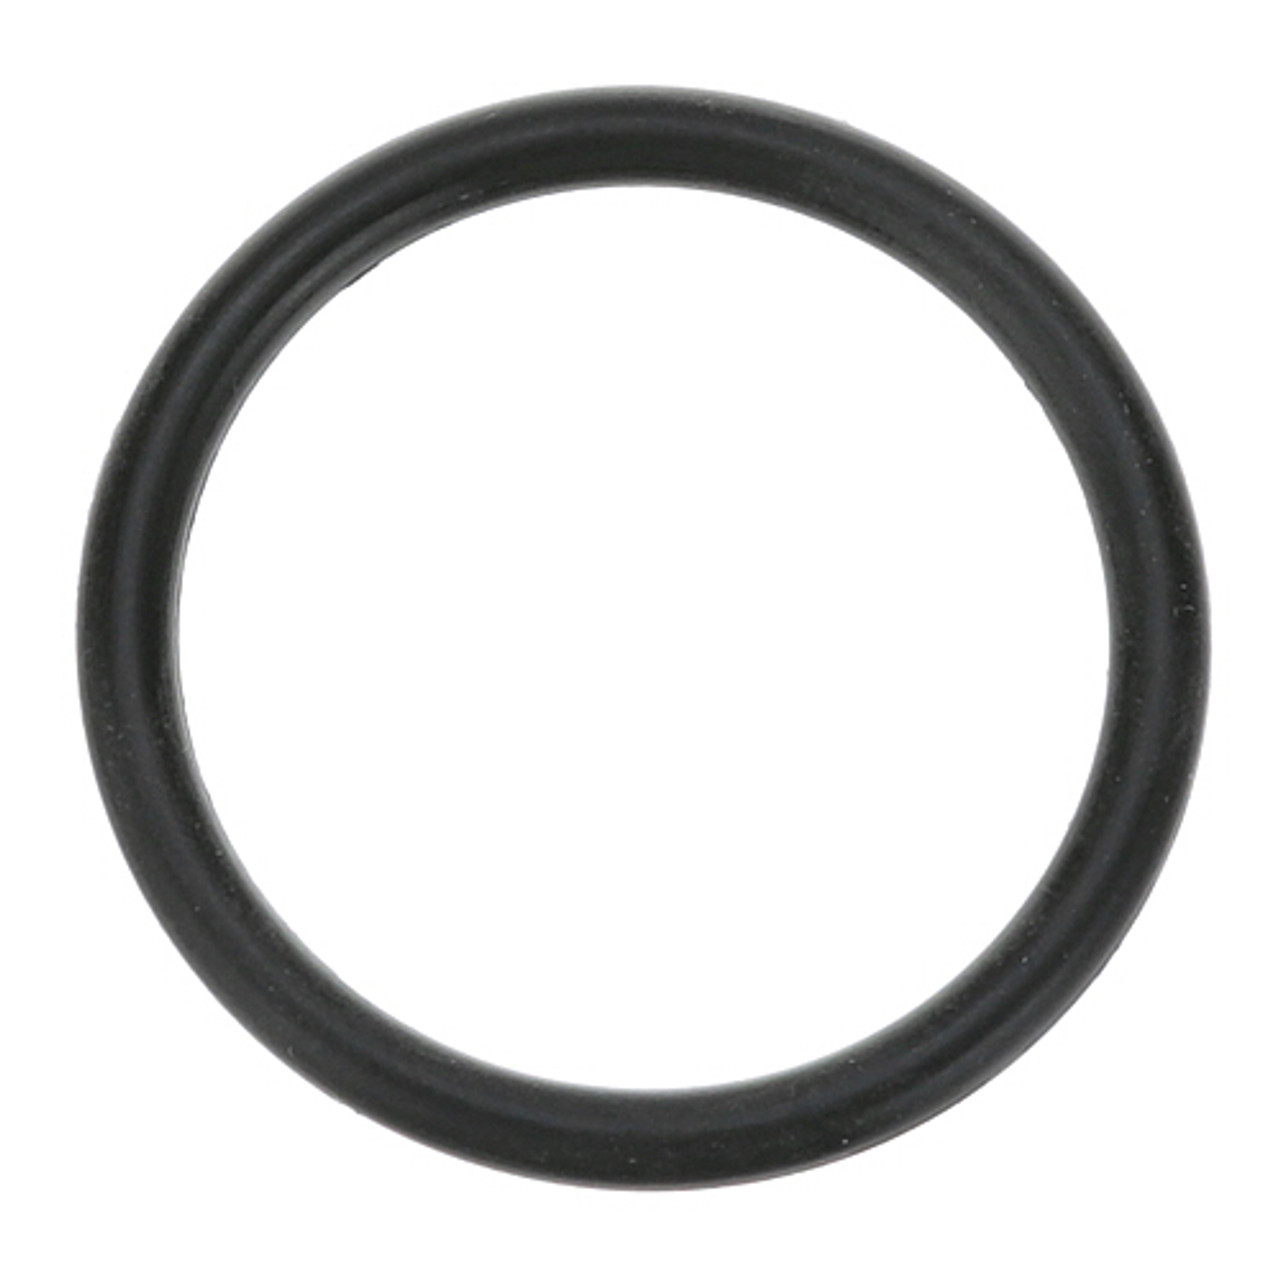 O-Ring 1-1/4" Id X 1/8" Width - Replacement Part For Market Forge 97-5110